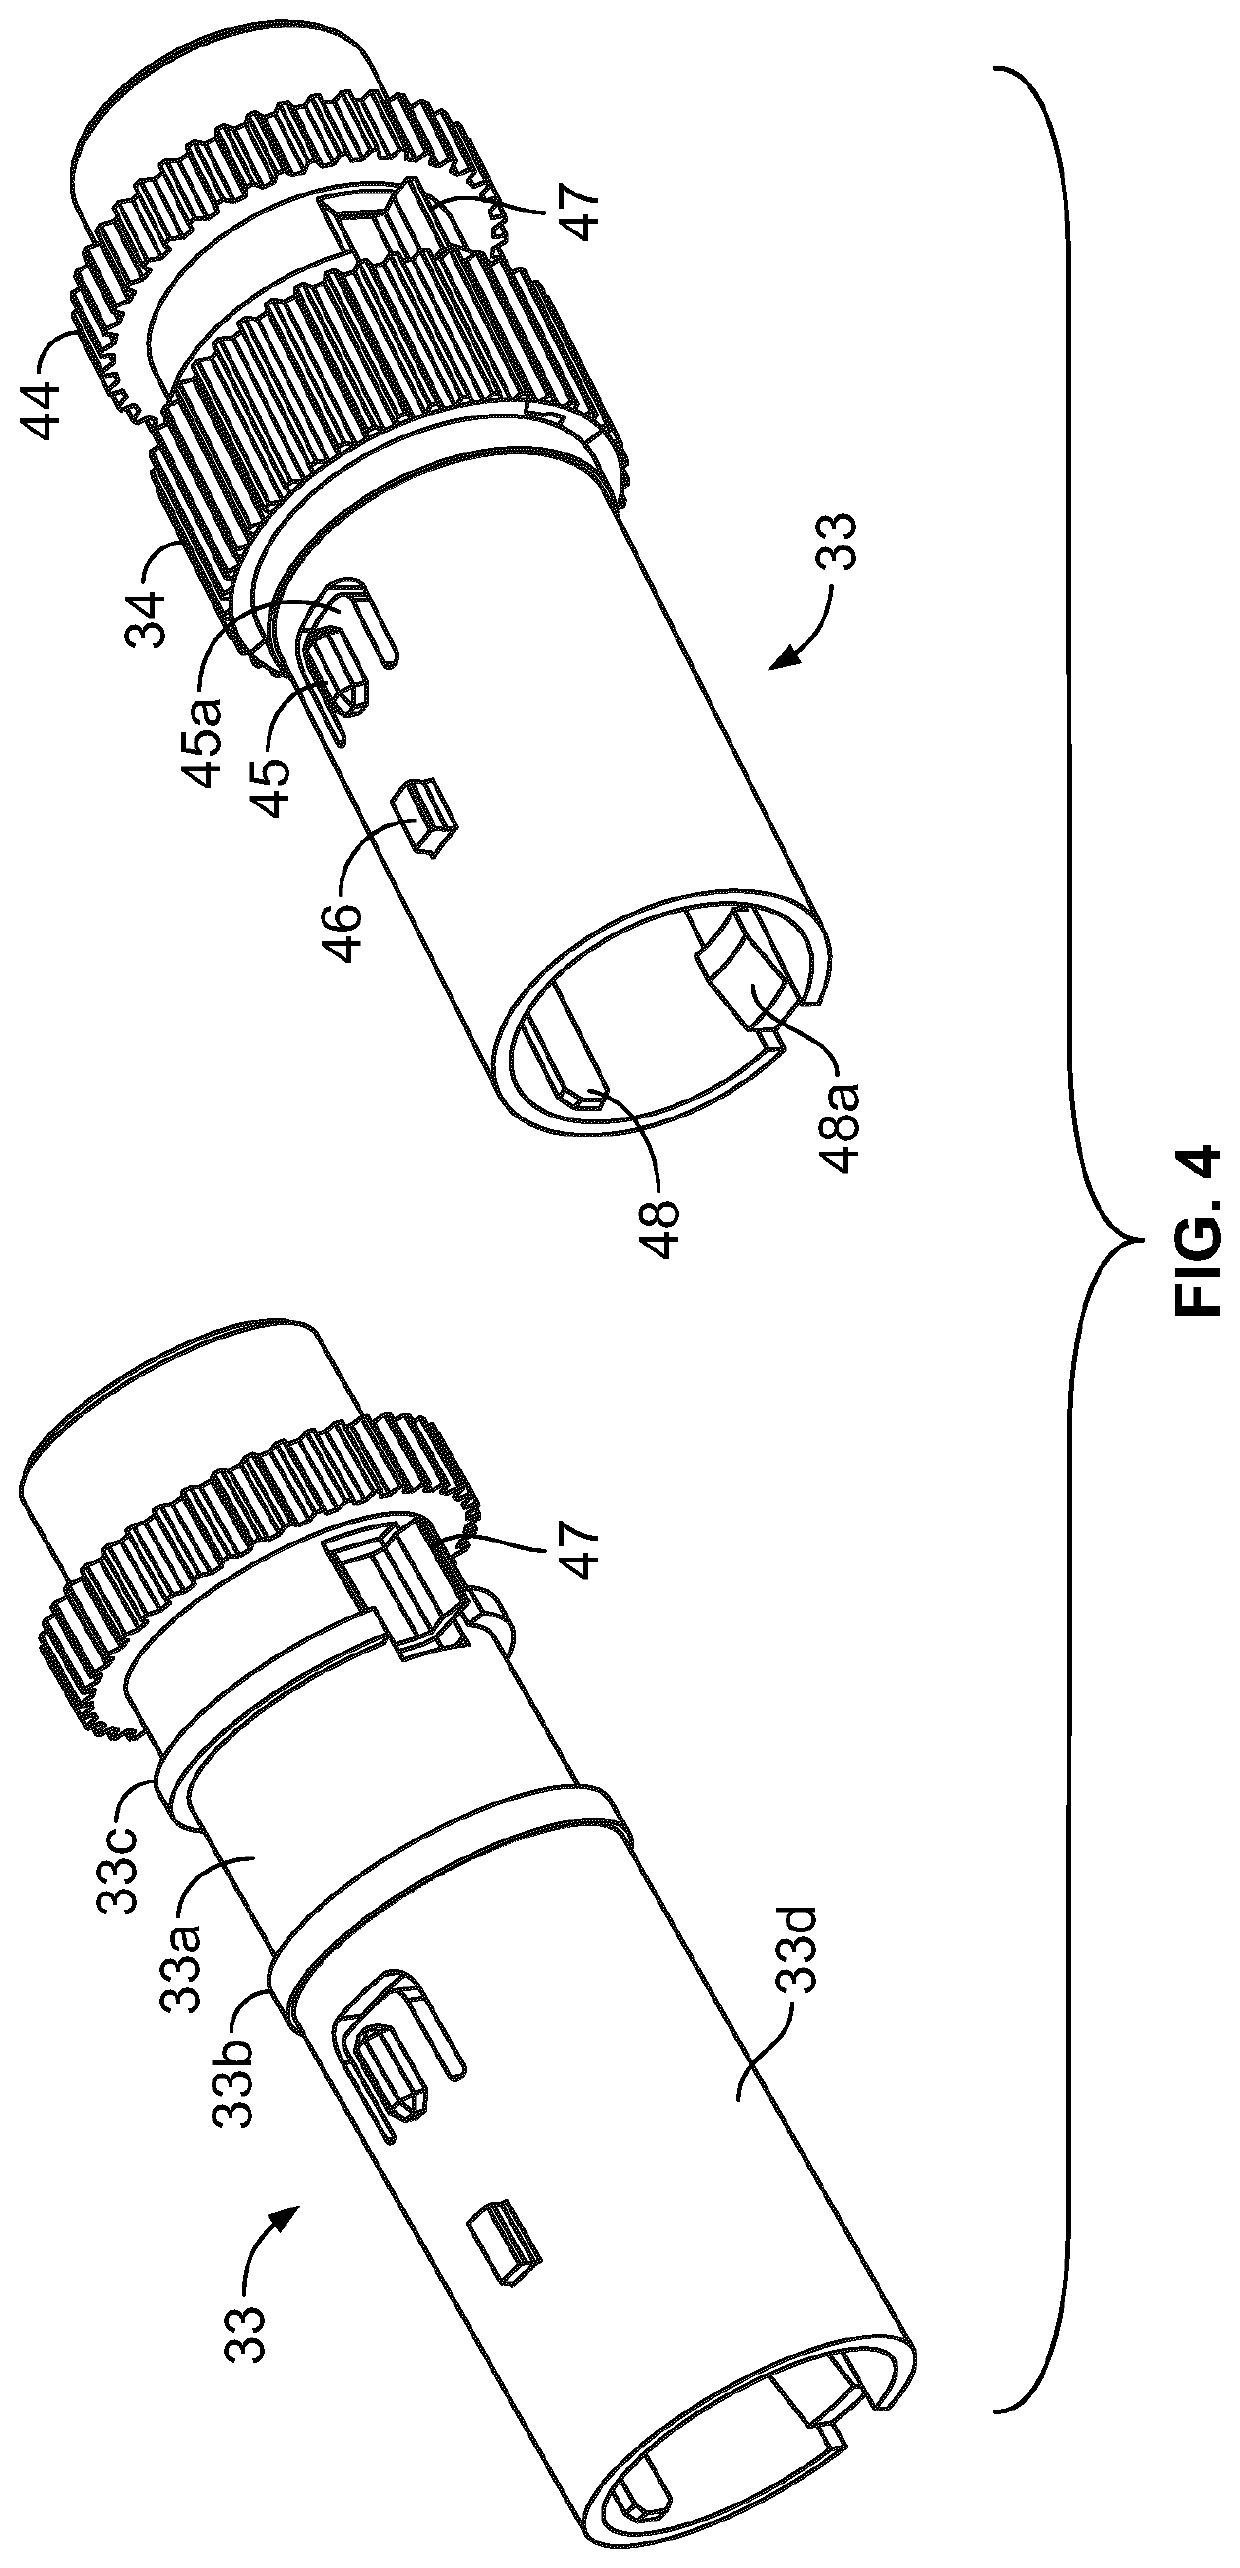 Injection device with user friendly dose selector